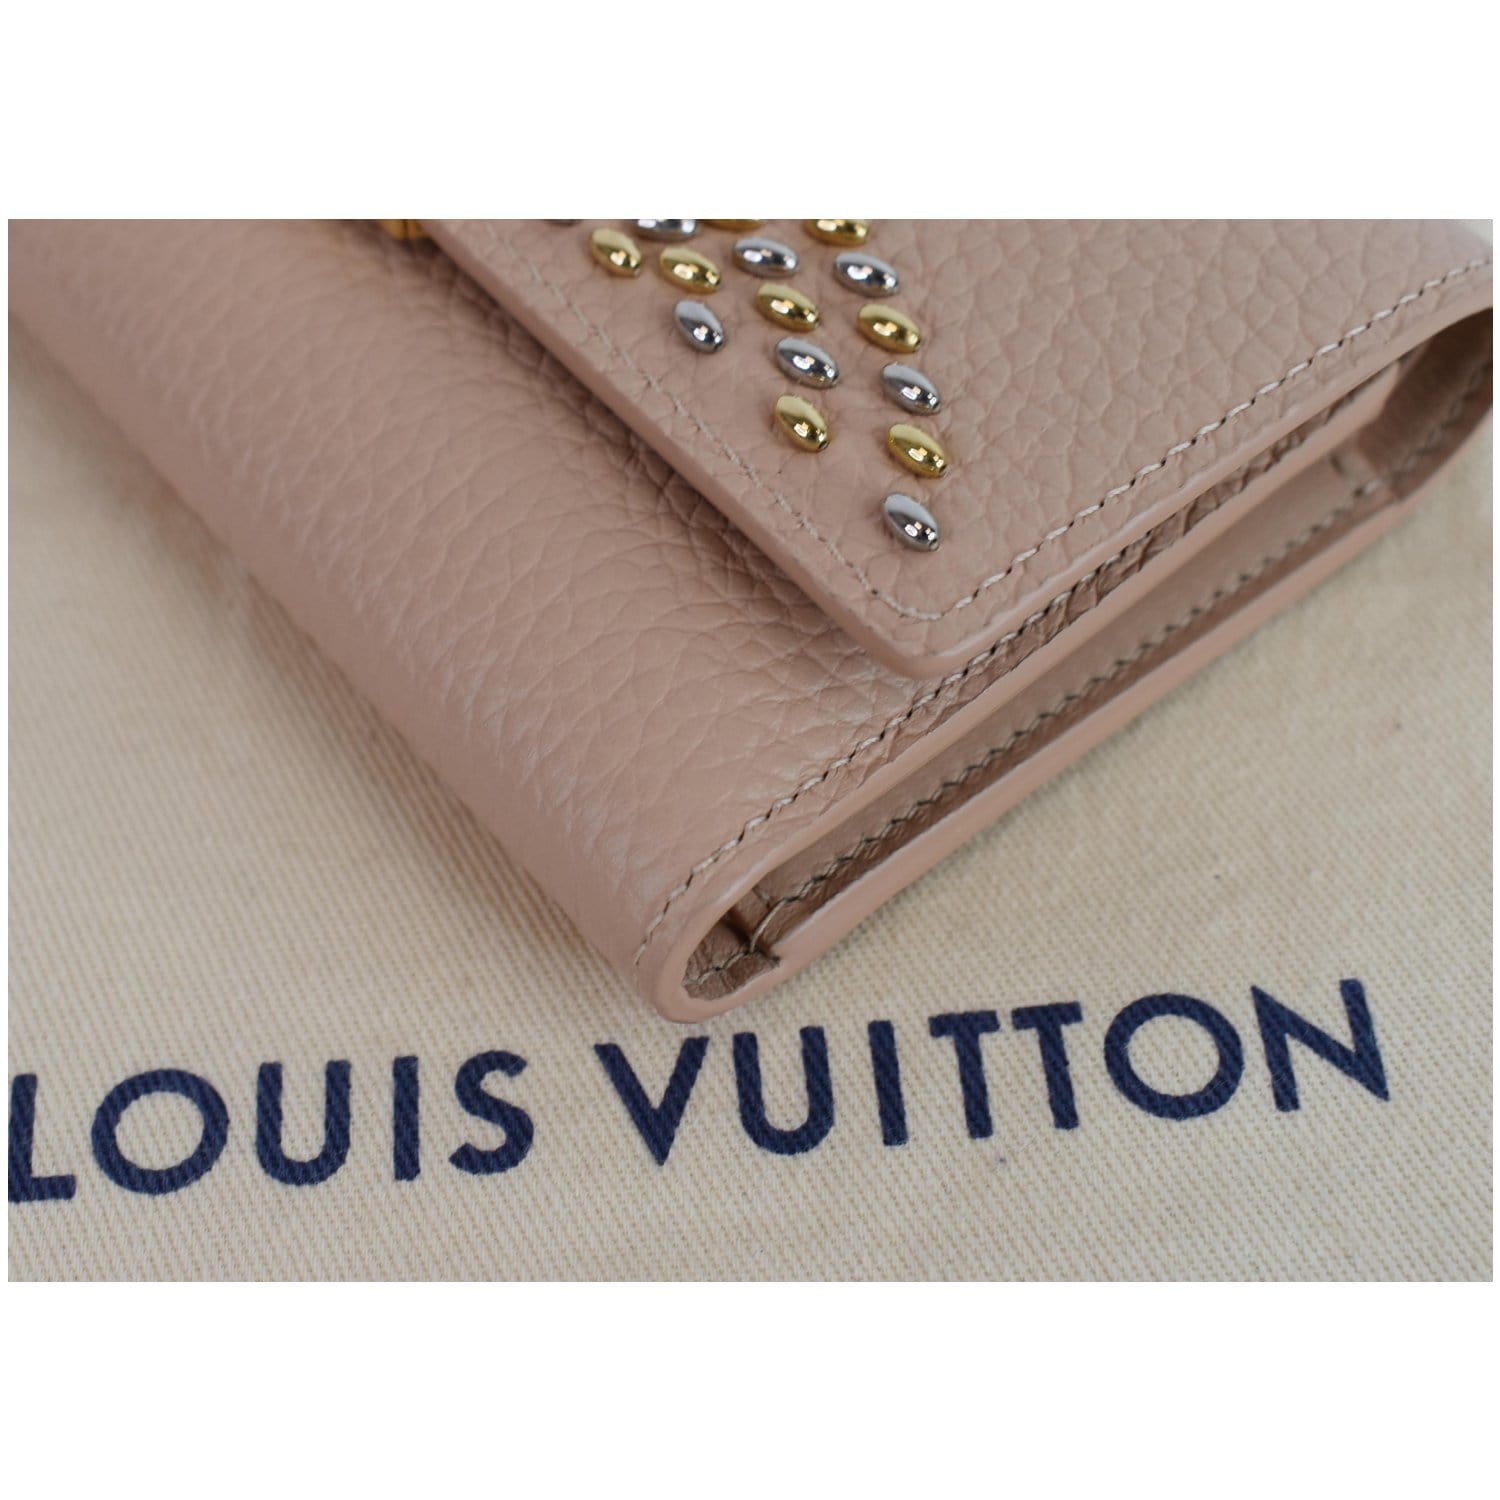 PRELOVED Louis Vuitton Beige Leather Studded Capucines Compact